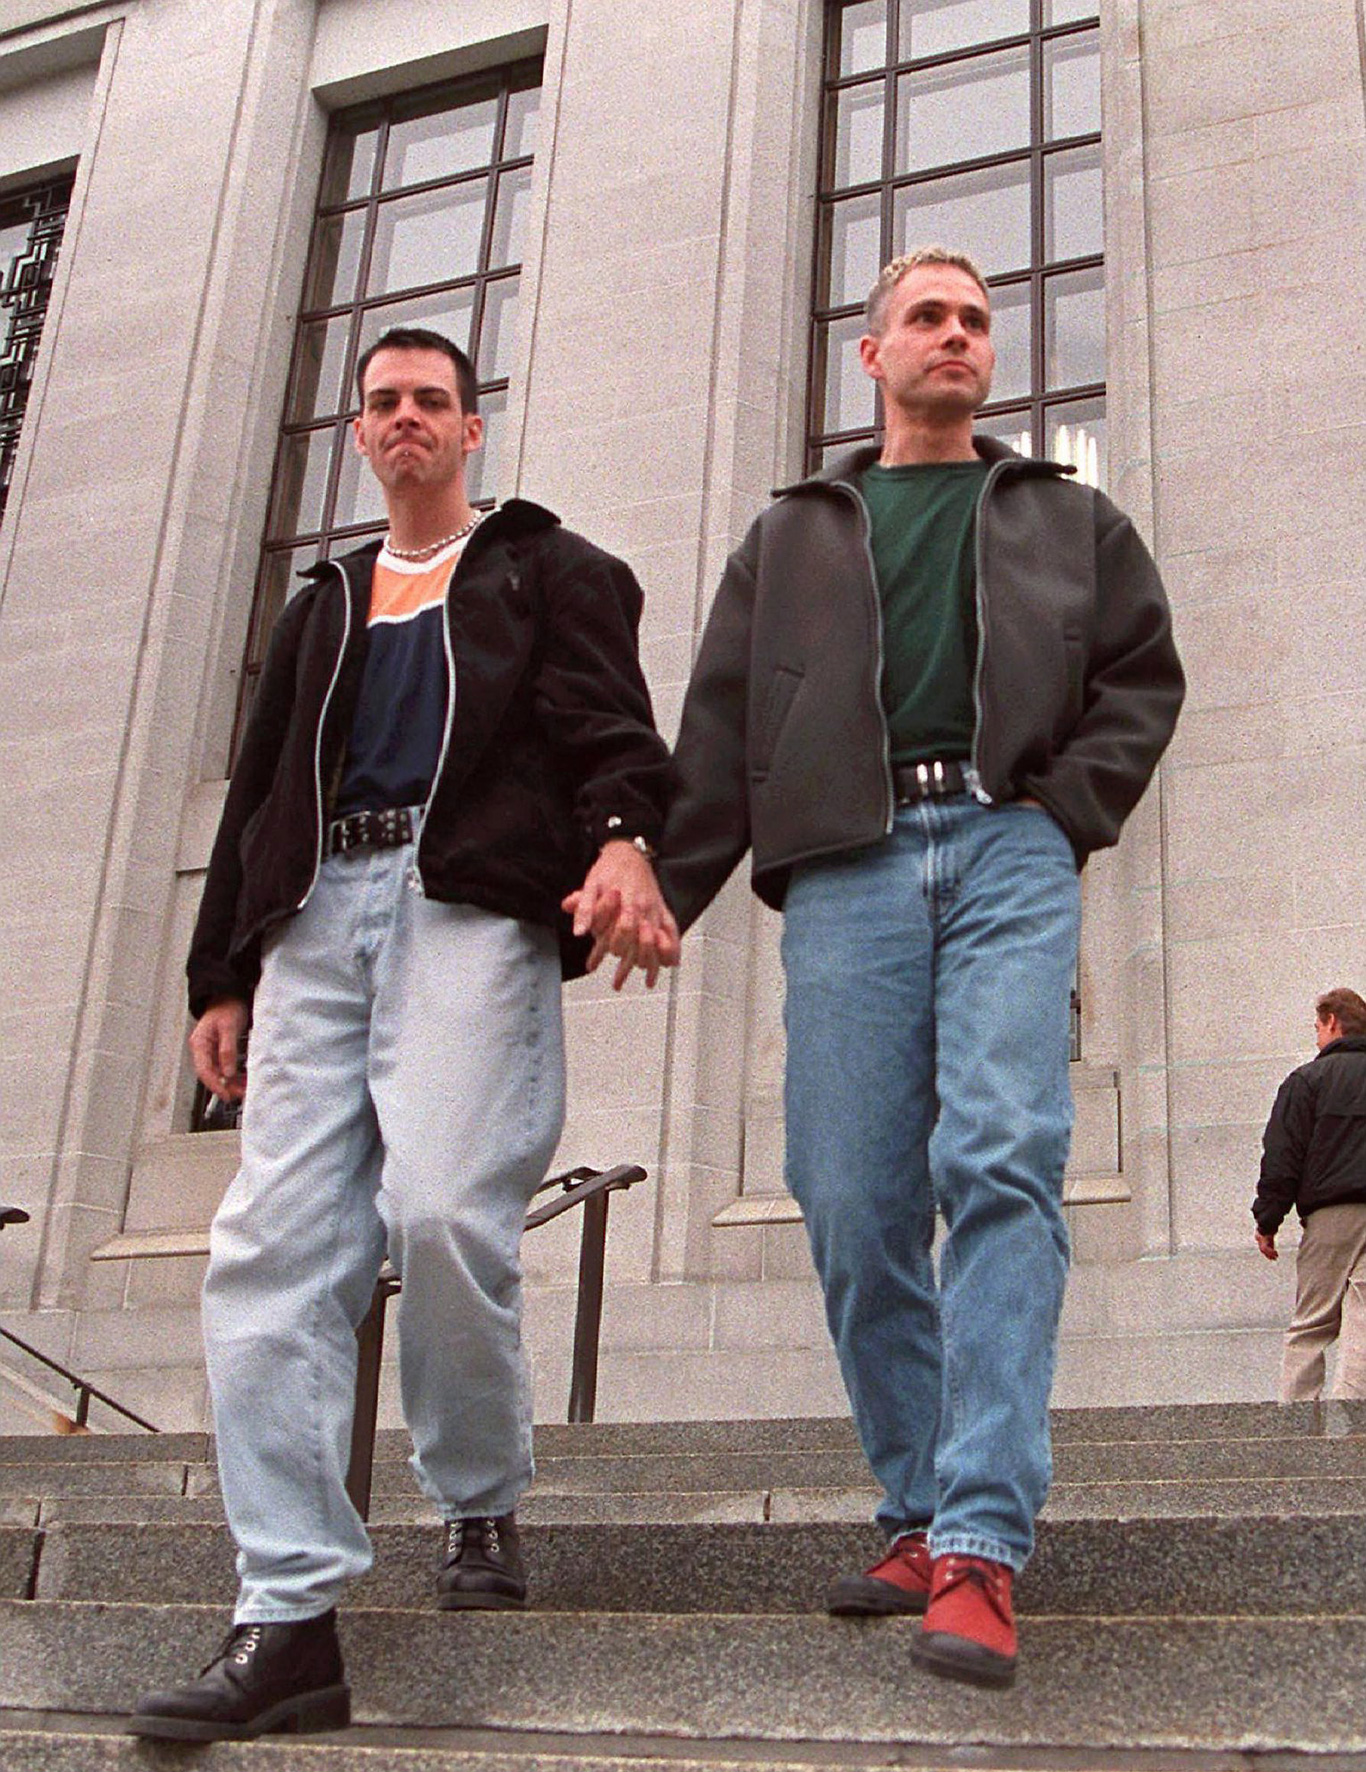 Two young men walking down outdoor steps, holding hands.